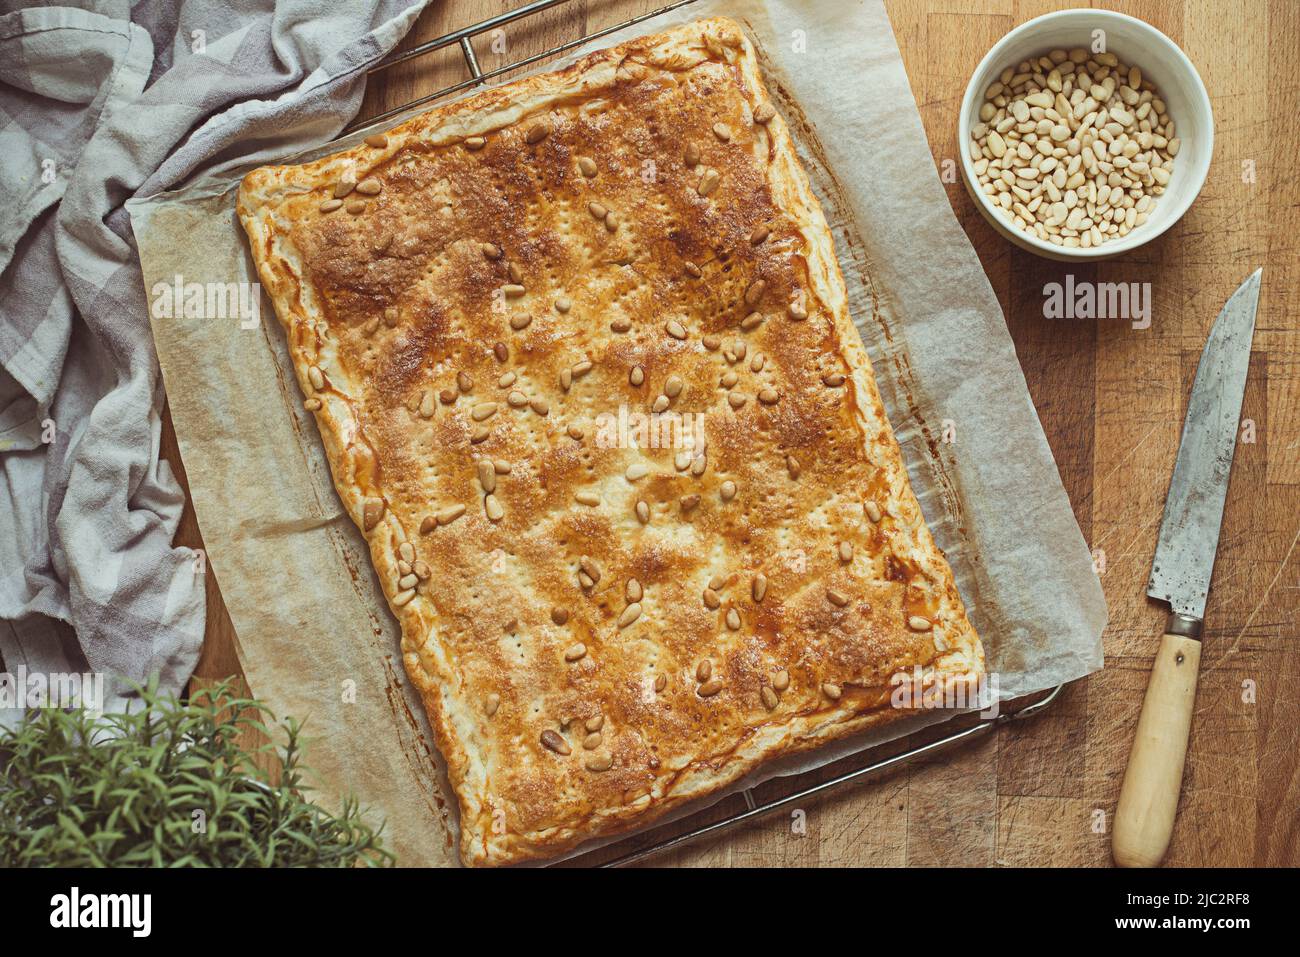 Overhead view of a spinach, feta and pine nut pie on a table Stock Photo